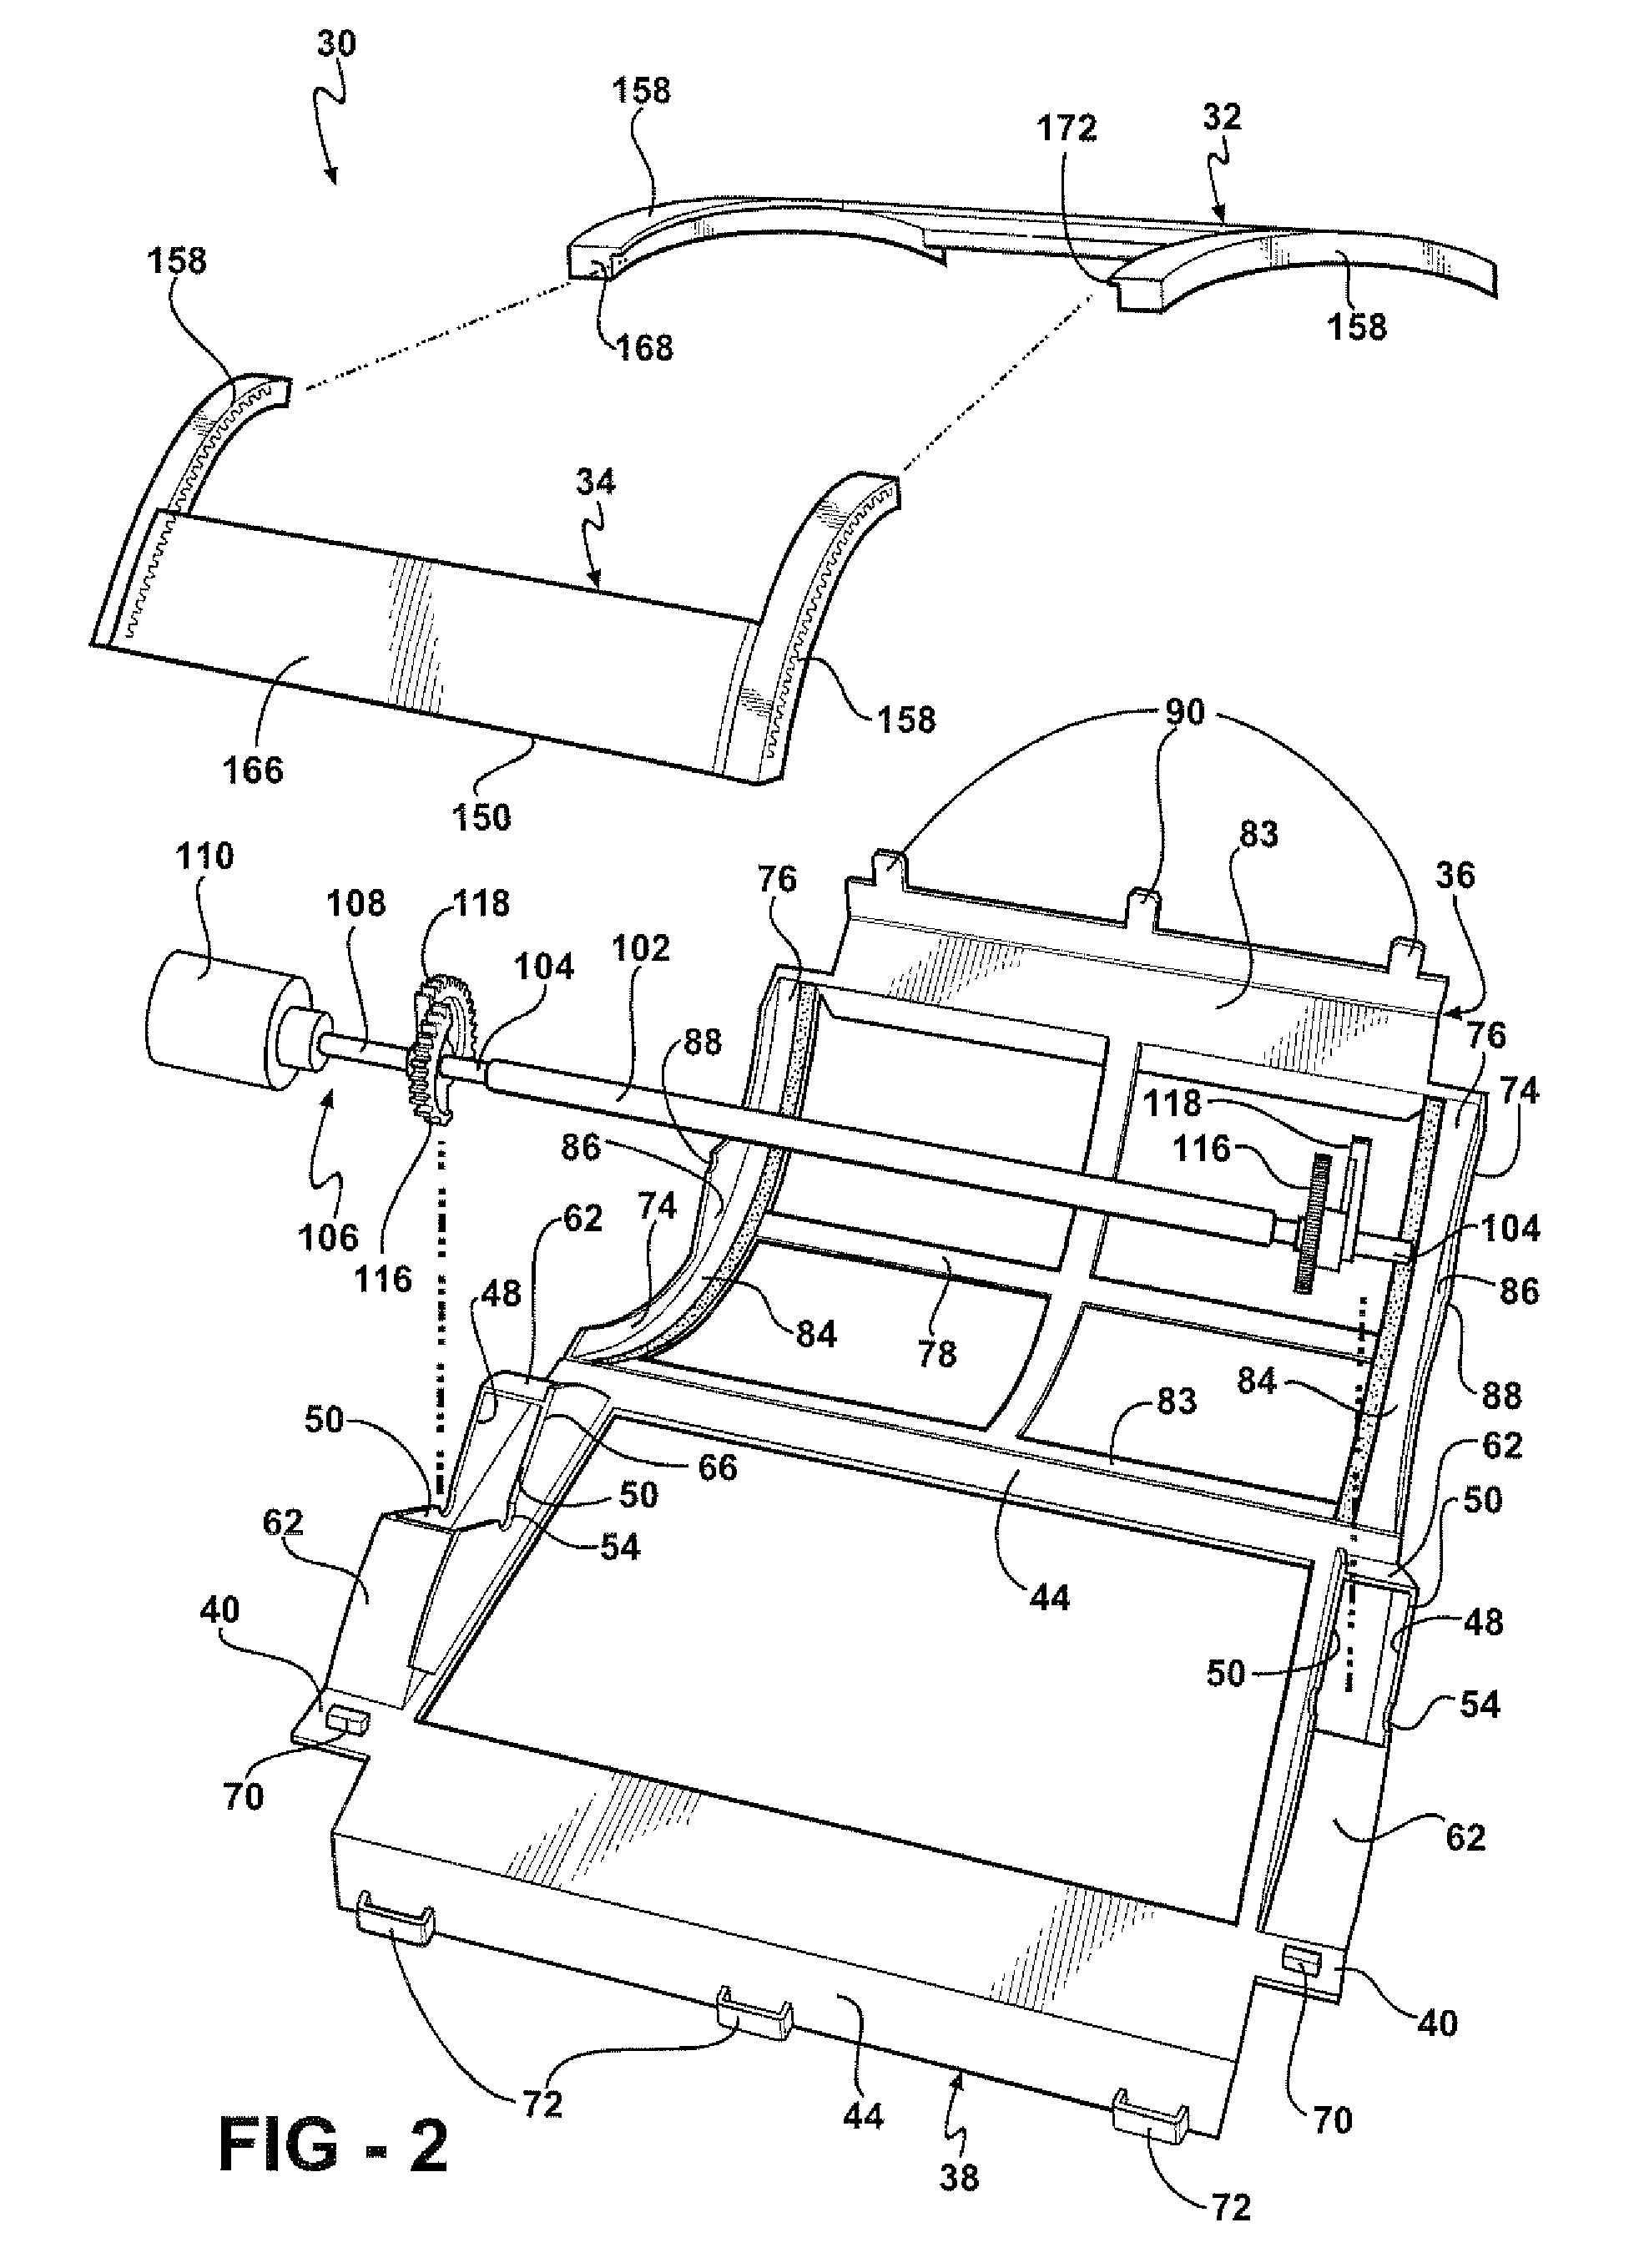 Sequential valve member driving mechanism for an HVAC system